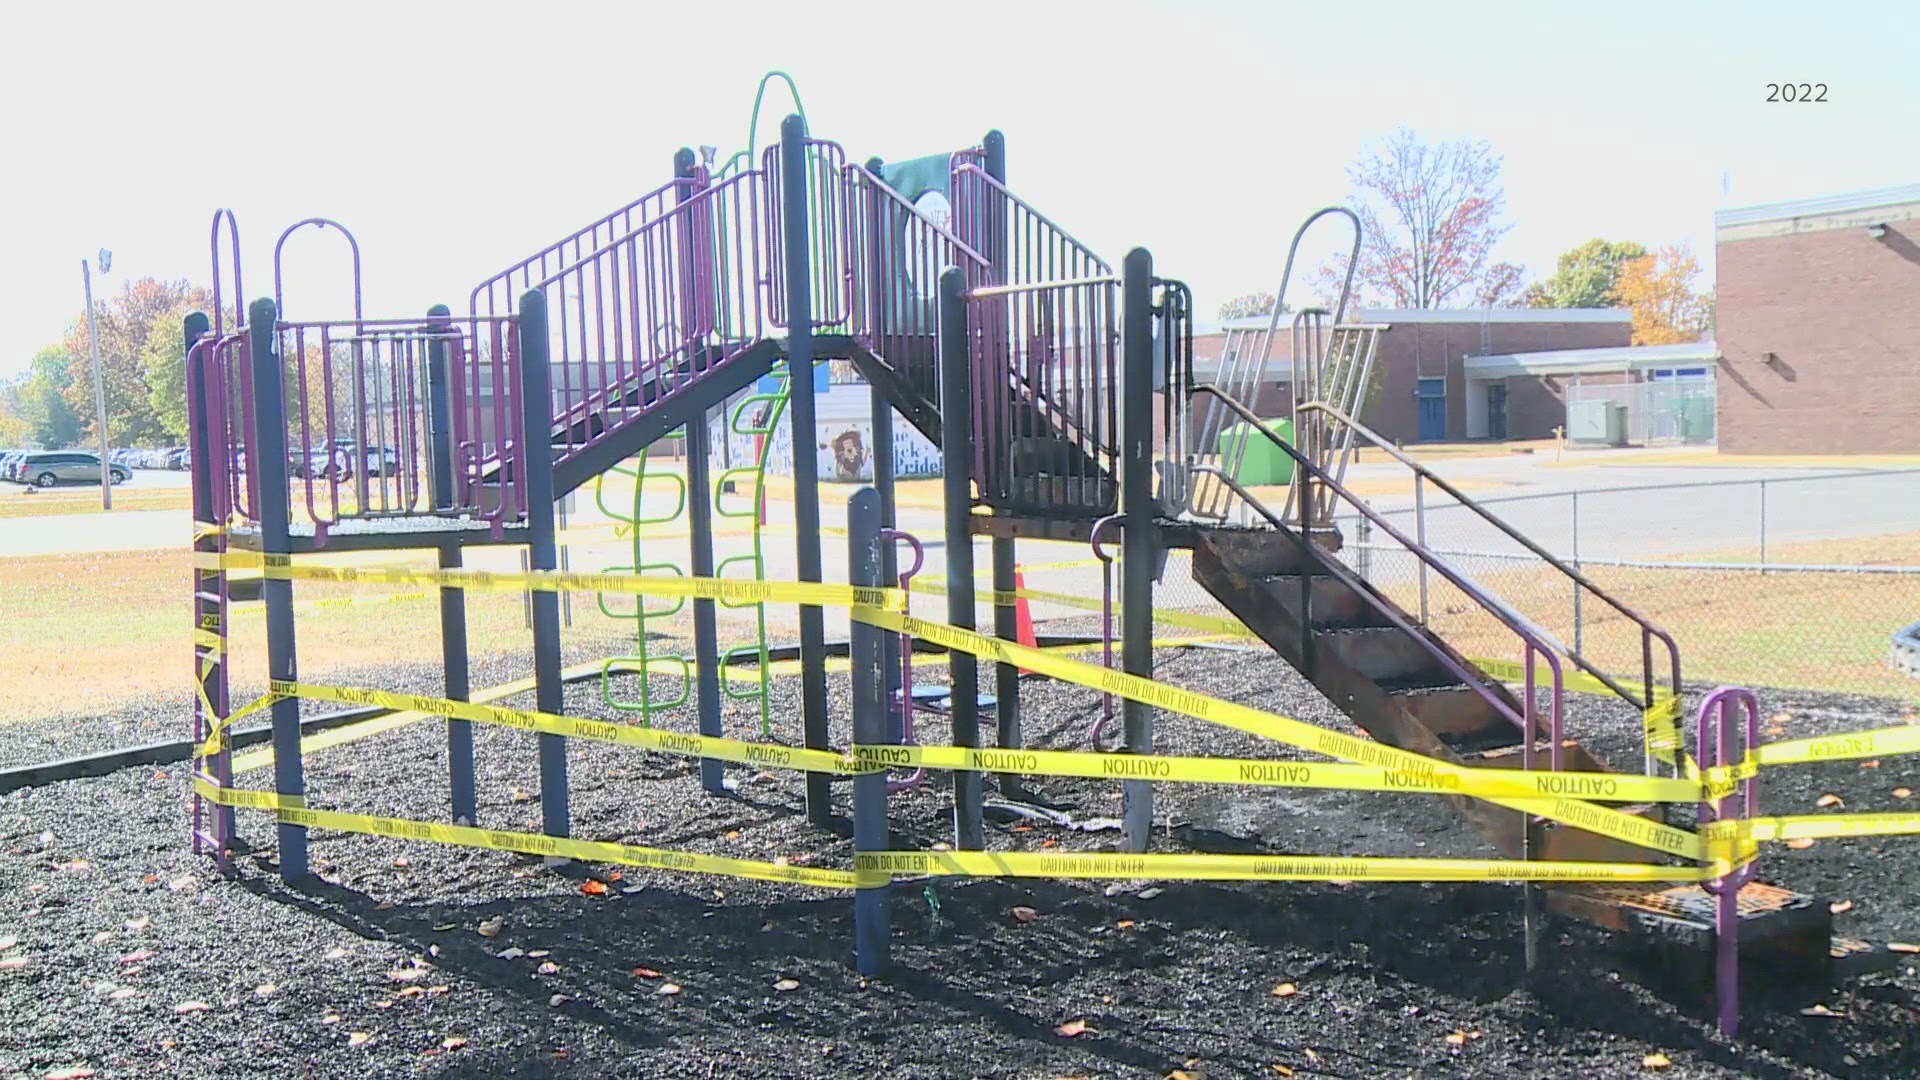 Blue Lick Elementary is getting a $400,000 playground after vandals set fire and destroyed several pieces of playground equipment.